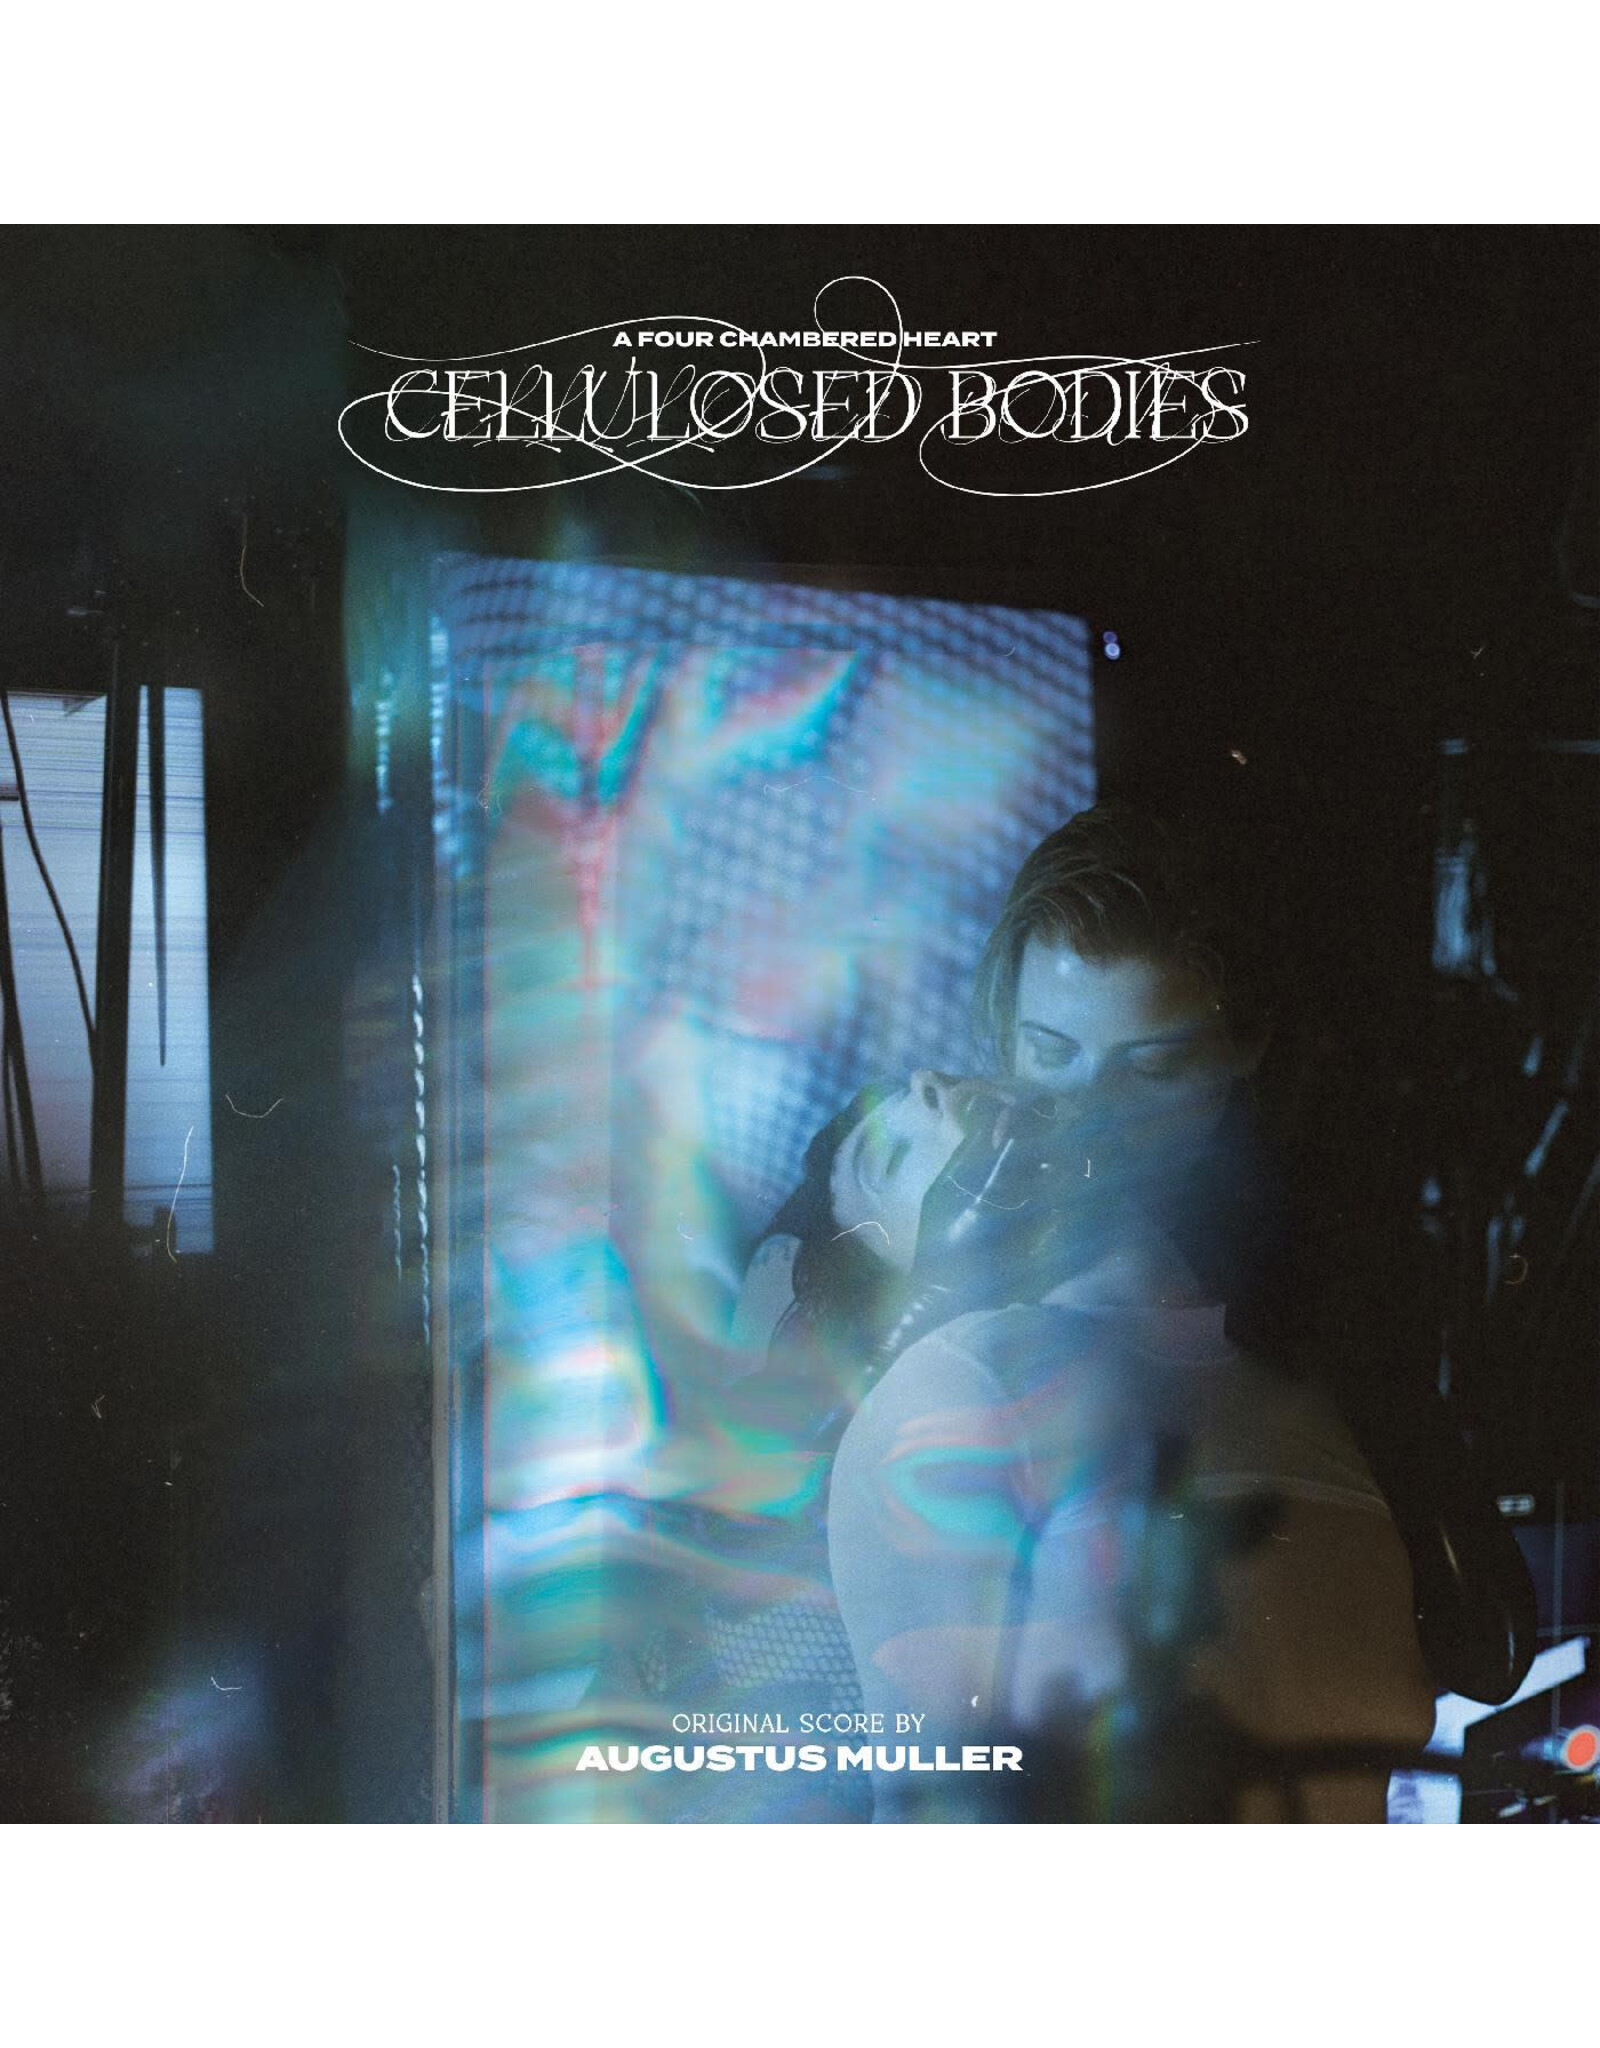 Nude Muller, Augustus [Boy Harsher]: CELLULOSED BODIES (CRYSTAL CLEAR) LP